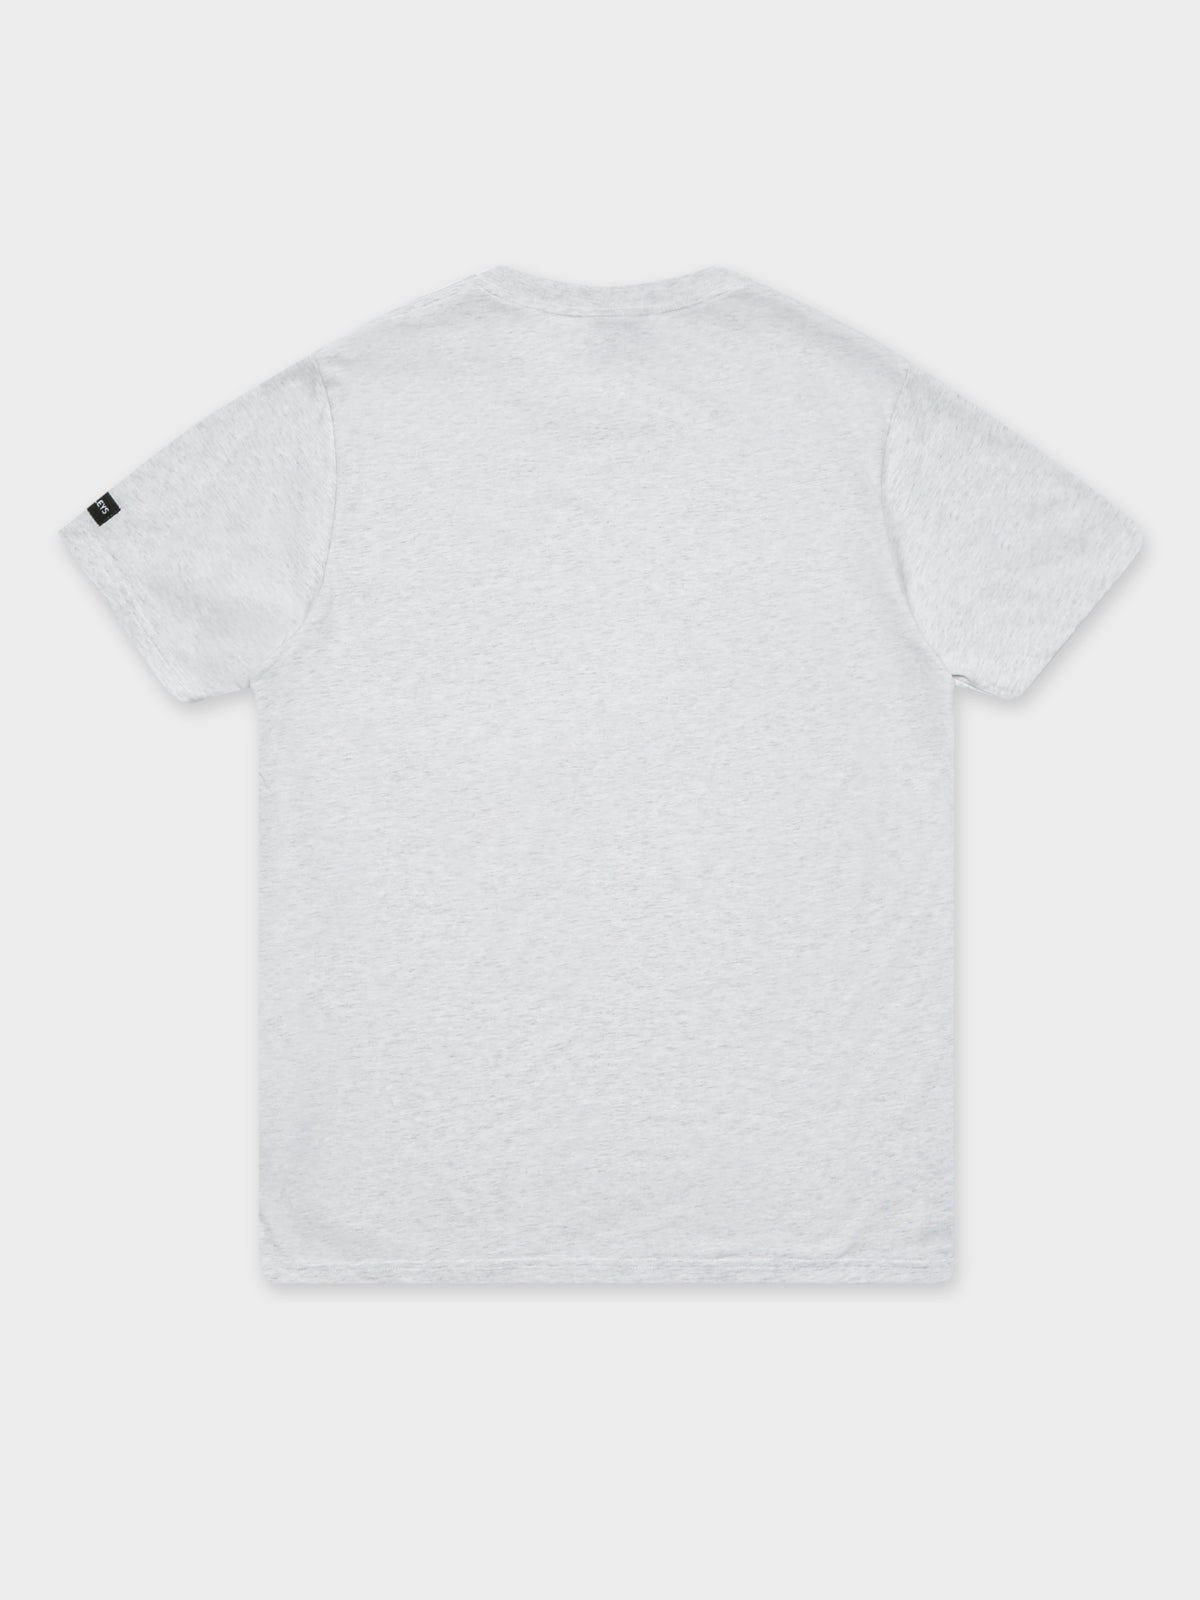 Vice T-Shirt in Snow Marle